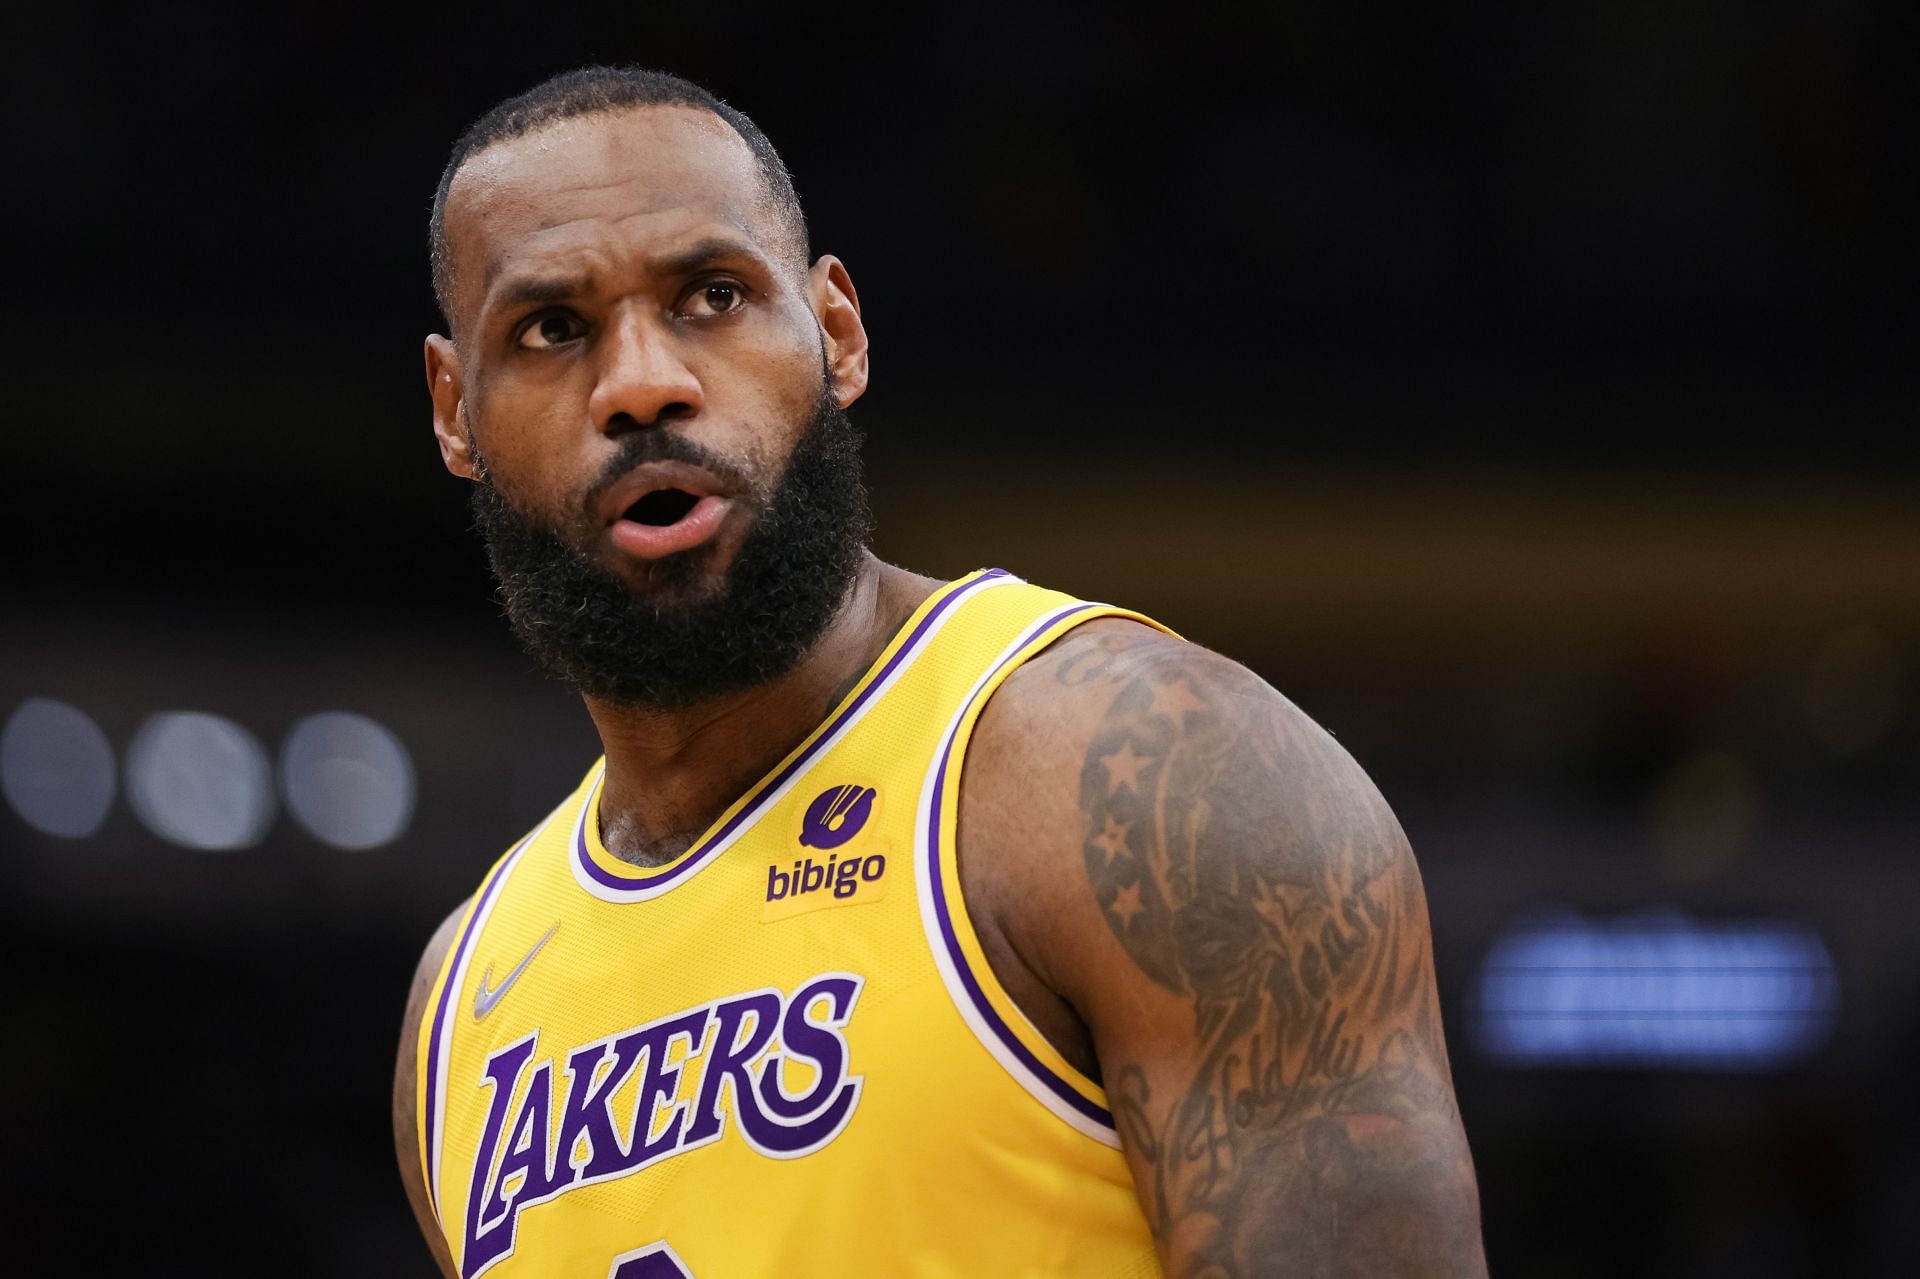 LA Lakers superstar forward LeBron James has led Los Angeles to a 21-20 record.